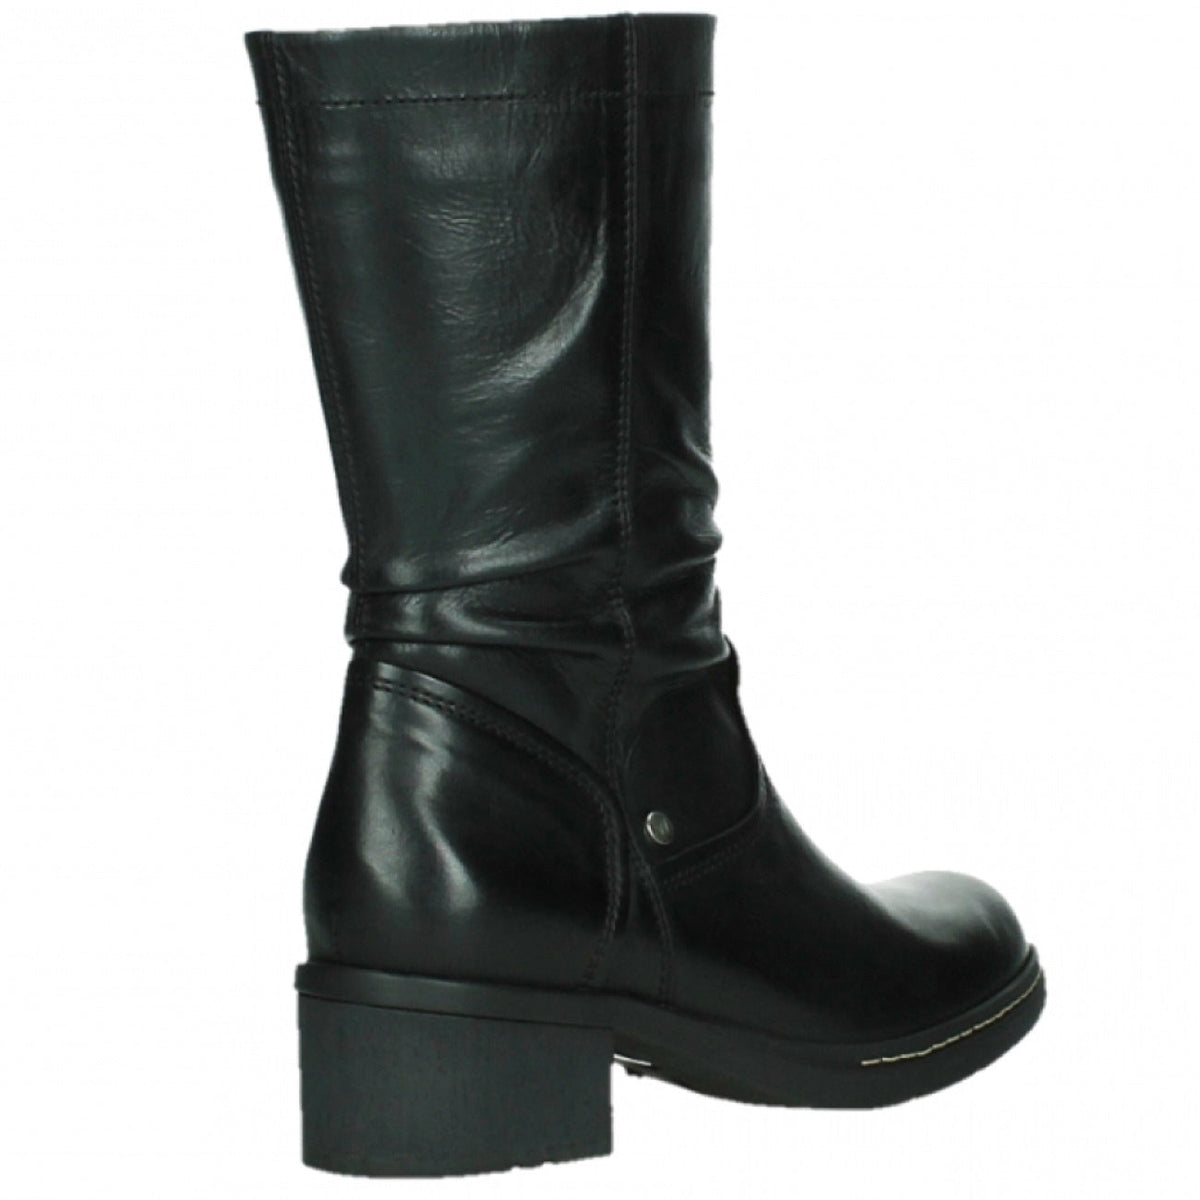 Wolky, Edmonton, Boots, Soft Wax Leather, Black Boots Wolky 